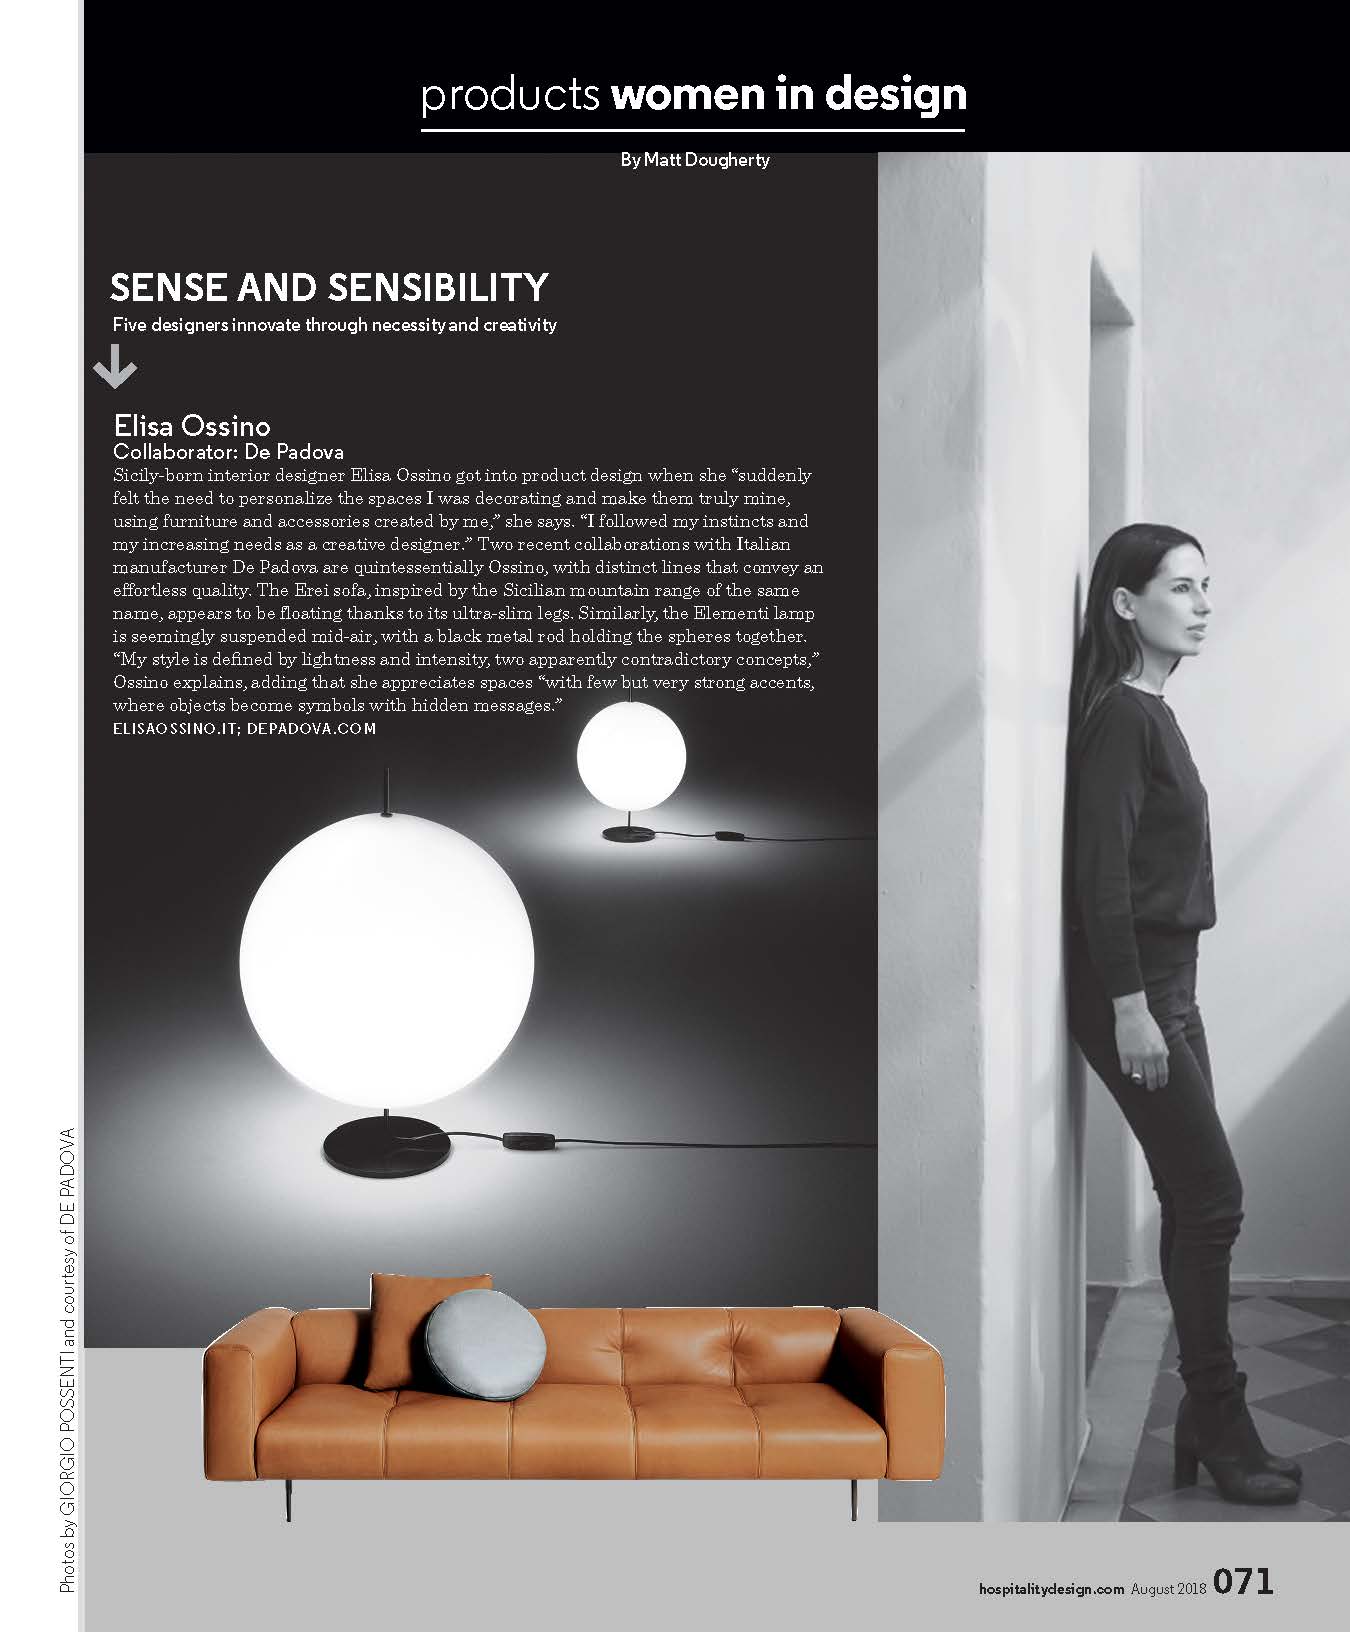 Women in Design feature in Hospitality Design includes Joni Vanderslice for the J Banks Collection for New Ravenna